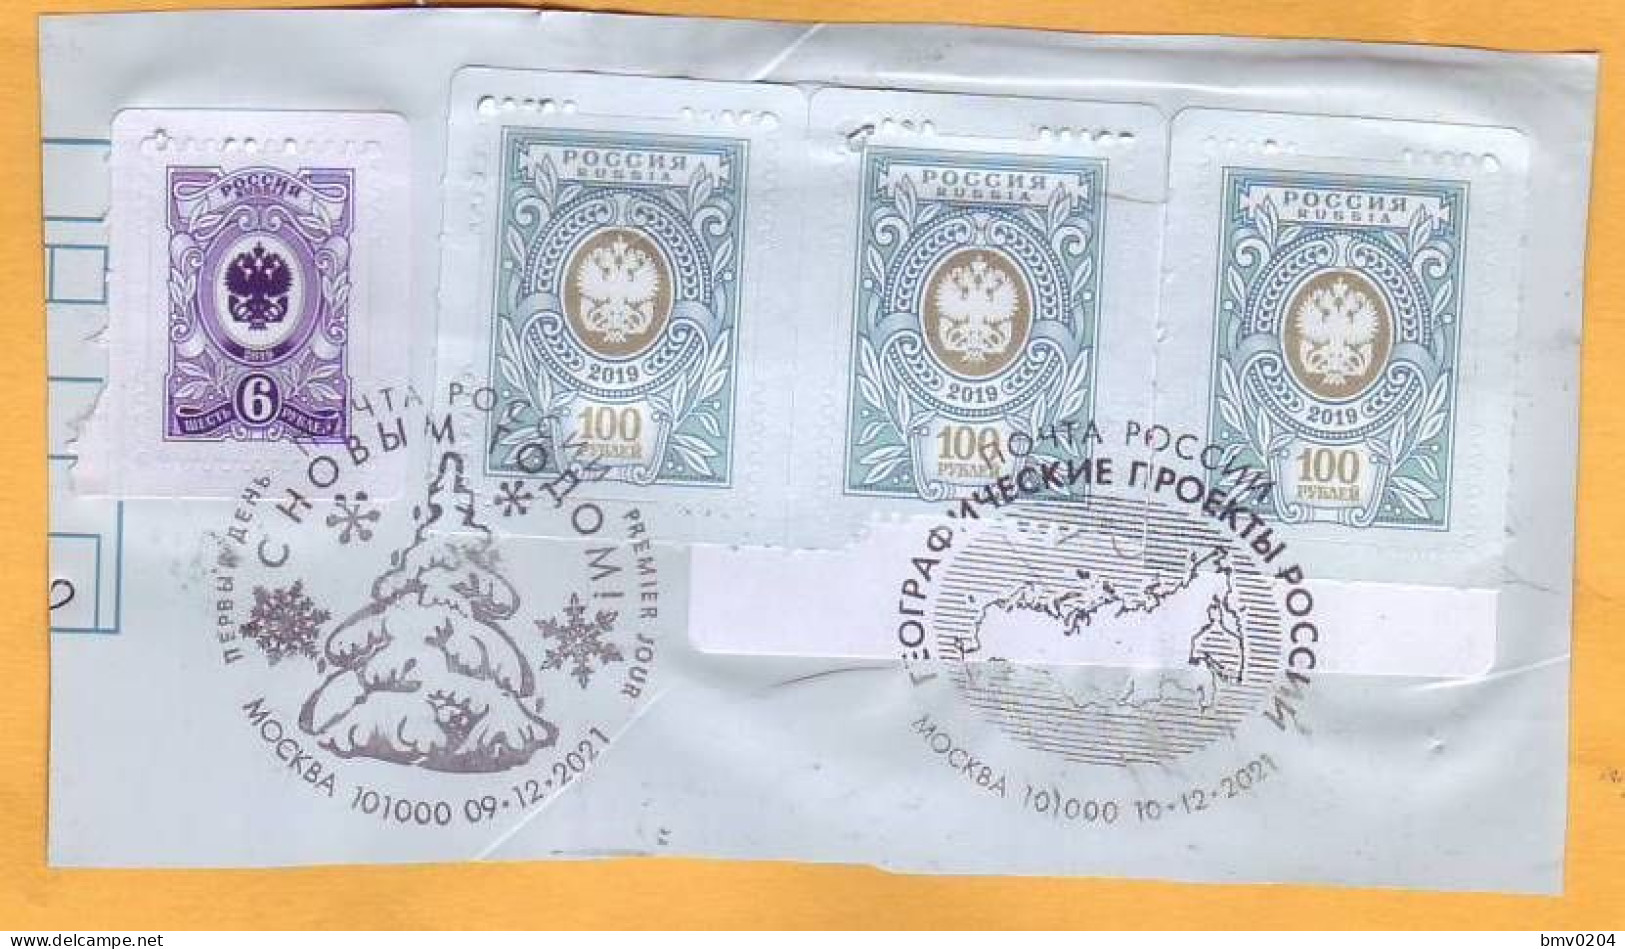 2019 2021 Used Part Of The Envelope Of The Registered Letter Russia - Moldova. Coat Of Arms Of Russia. - Gebraucht